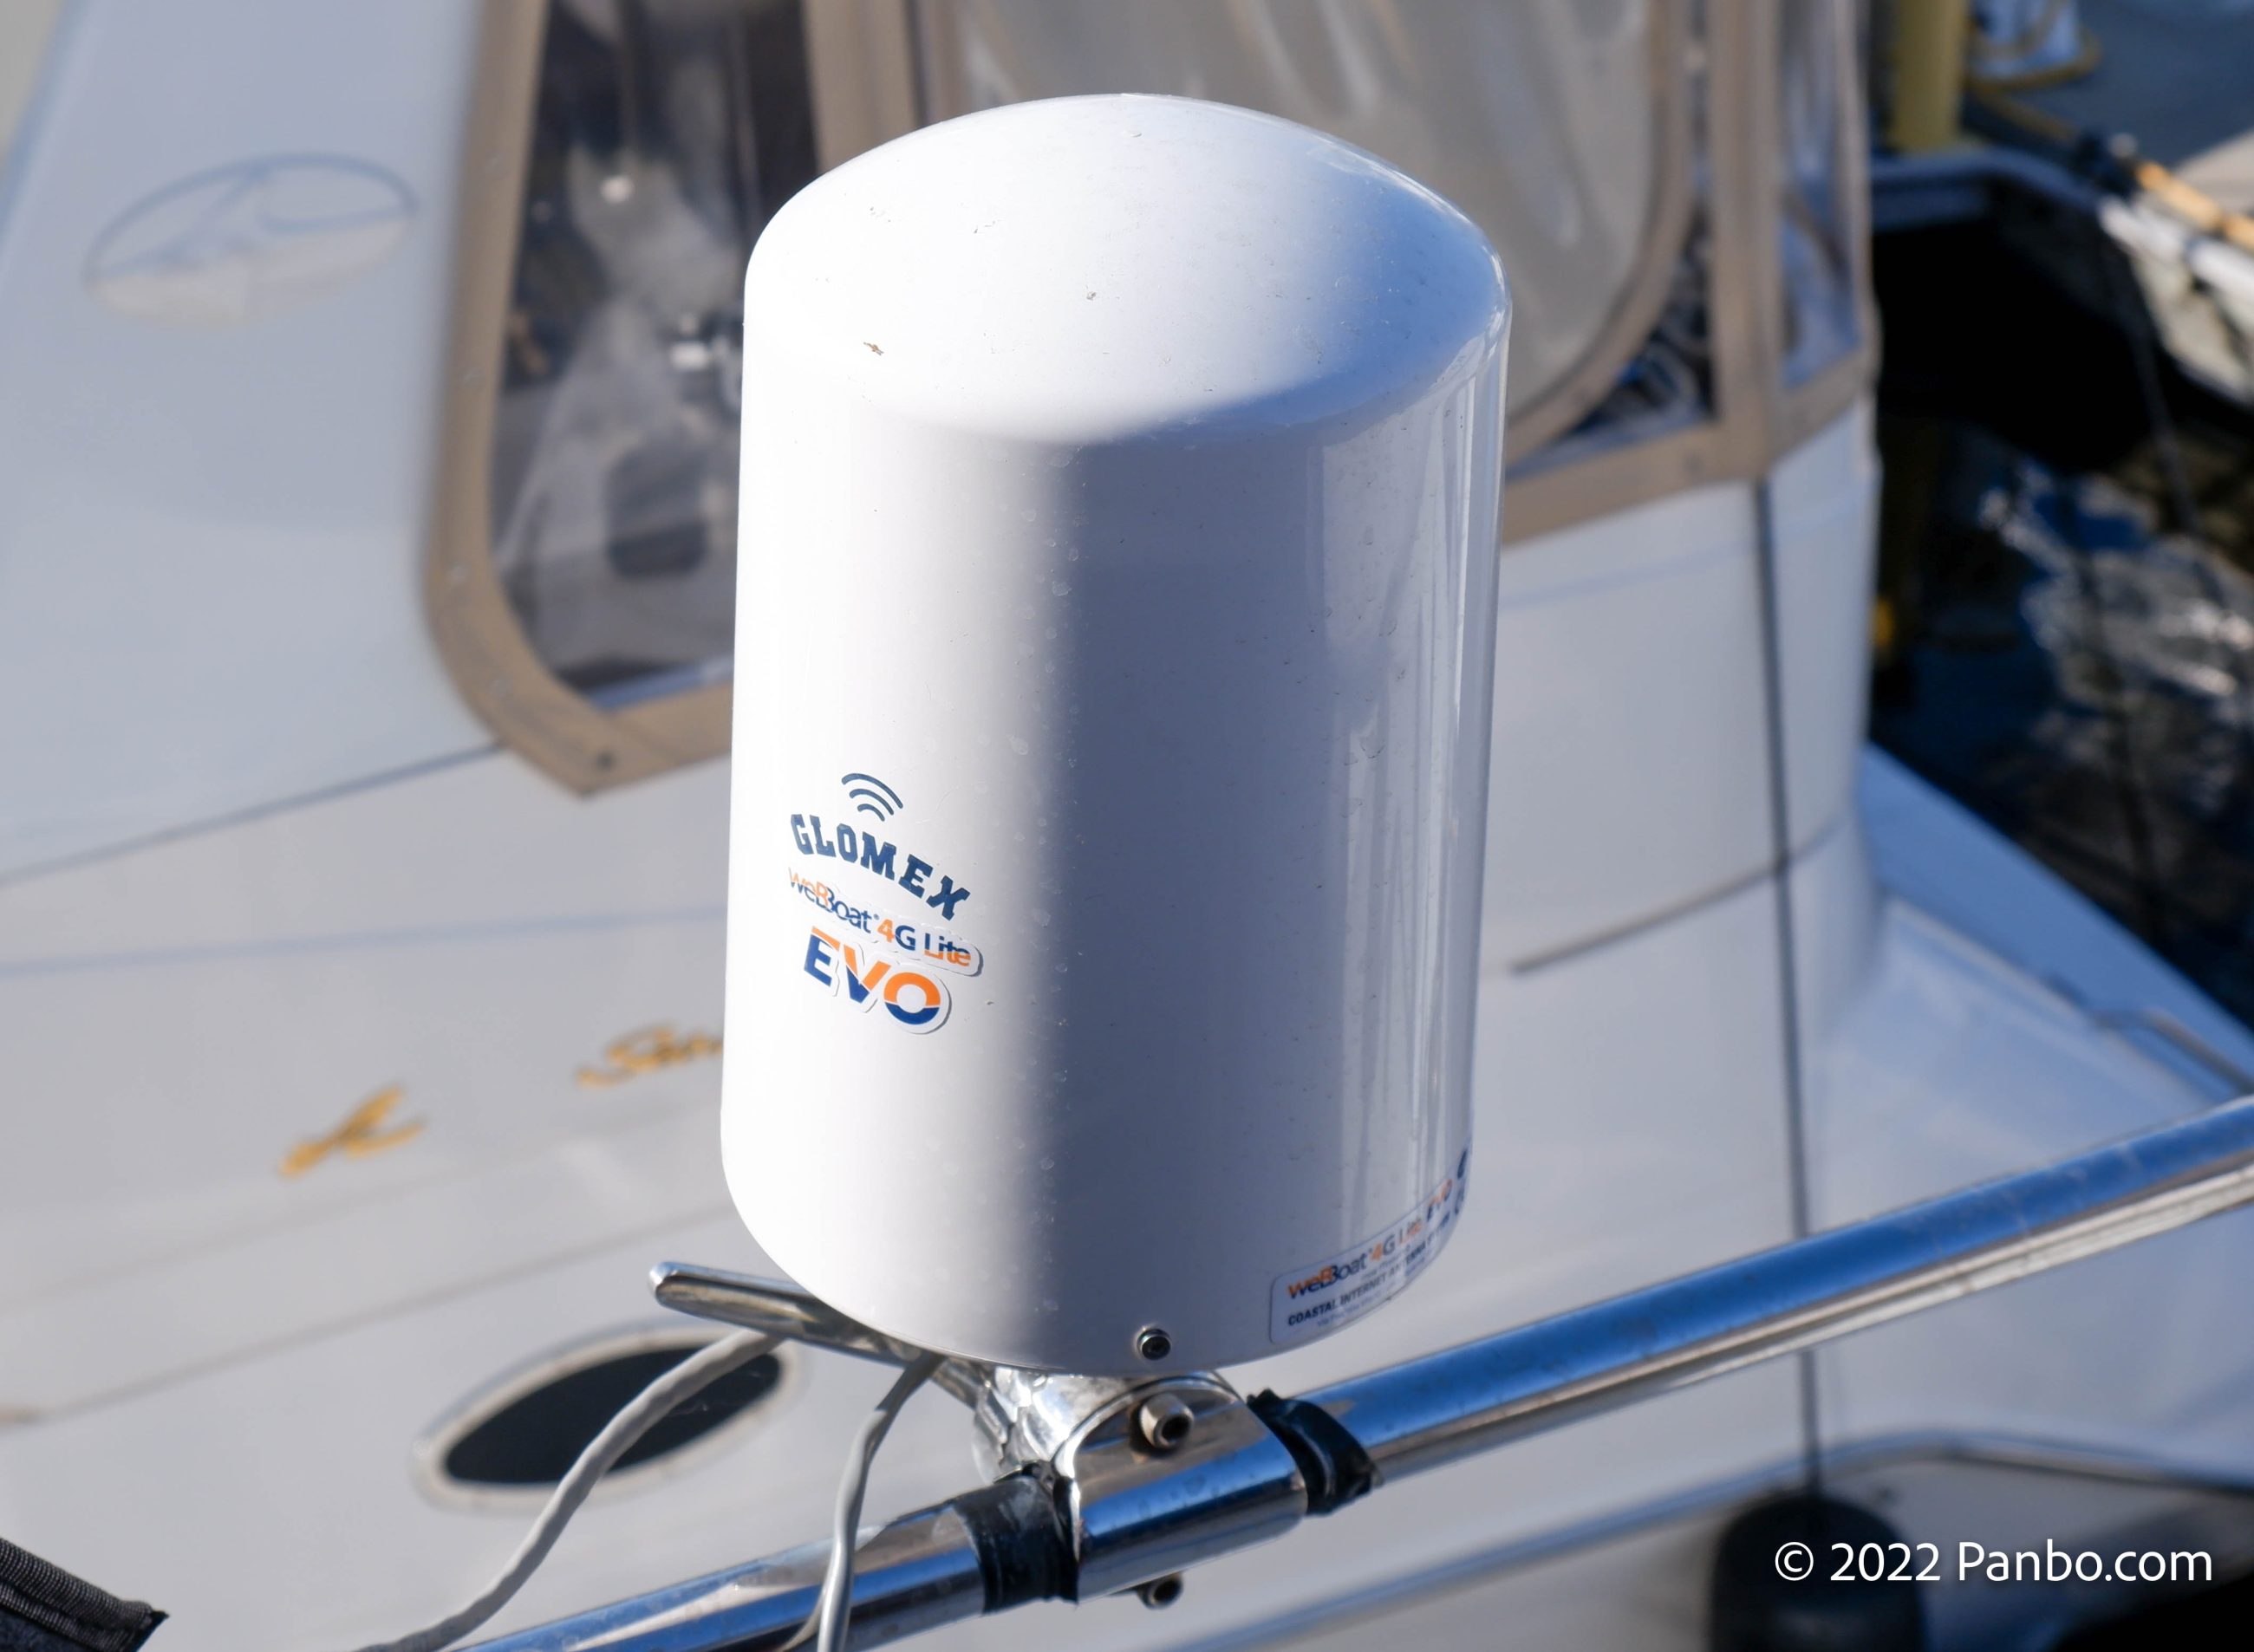 Glomex WebBoat 4G Lite EVO, compact internet access with a hitch